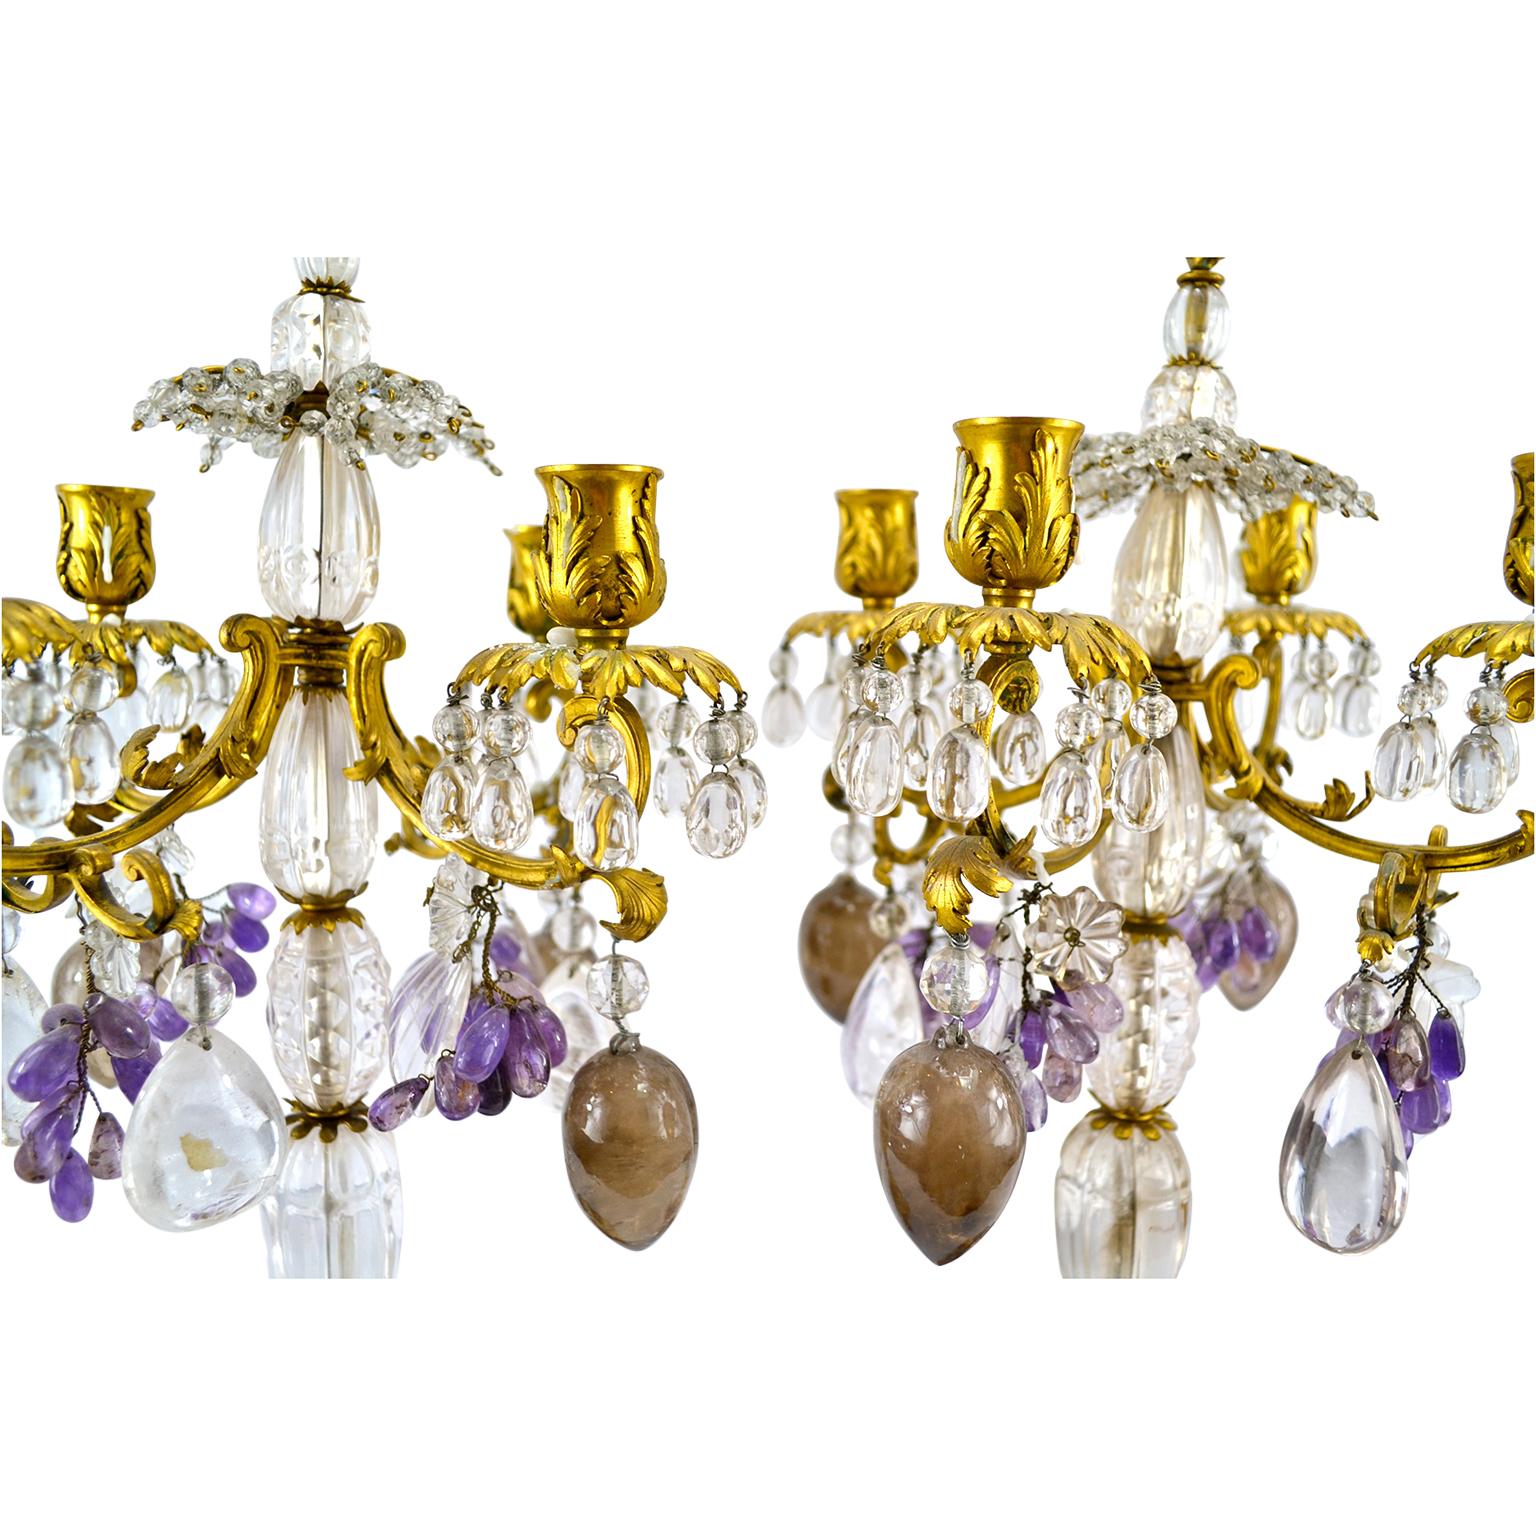 French Pair of Louis XV Style Gilt Bronze Rock Crystal and Amethyst Candelabra